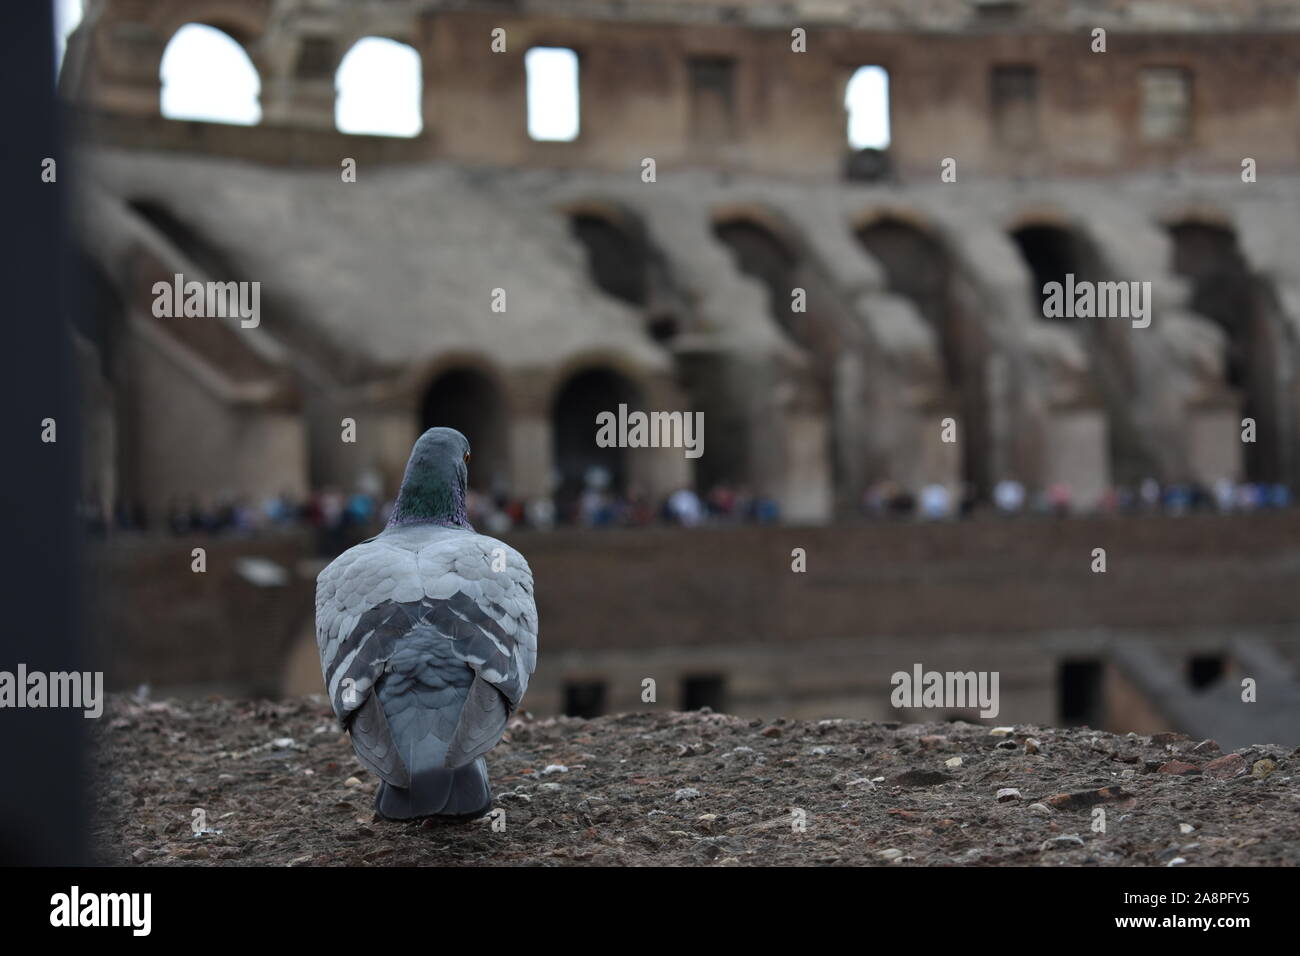 A pigeon in Rome sitting and observing people and the environment around it Stock Photo